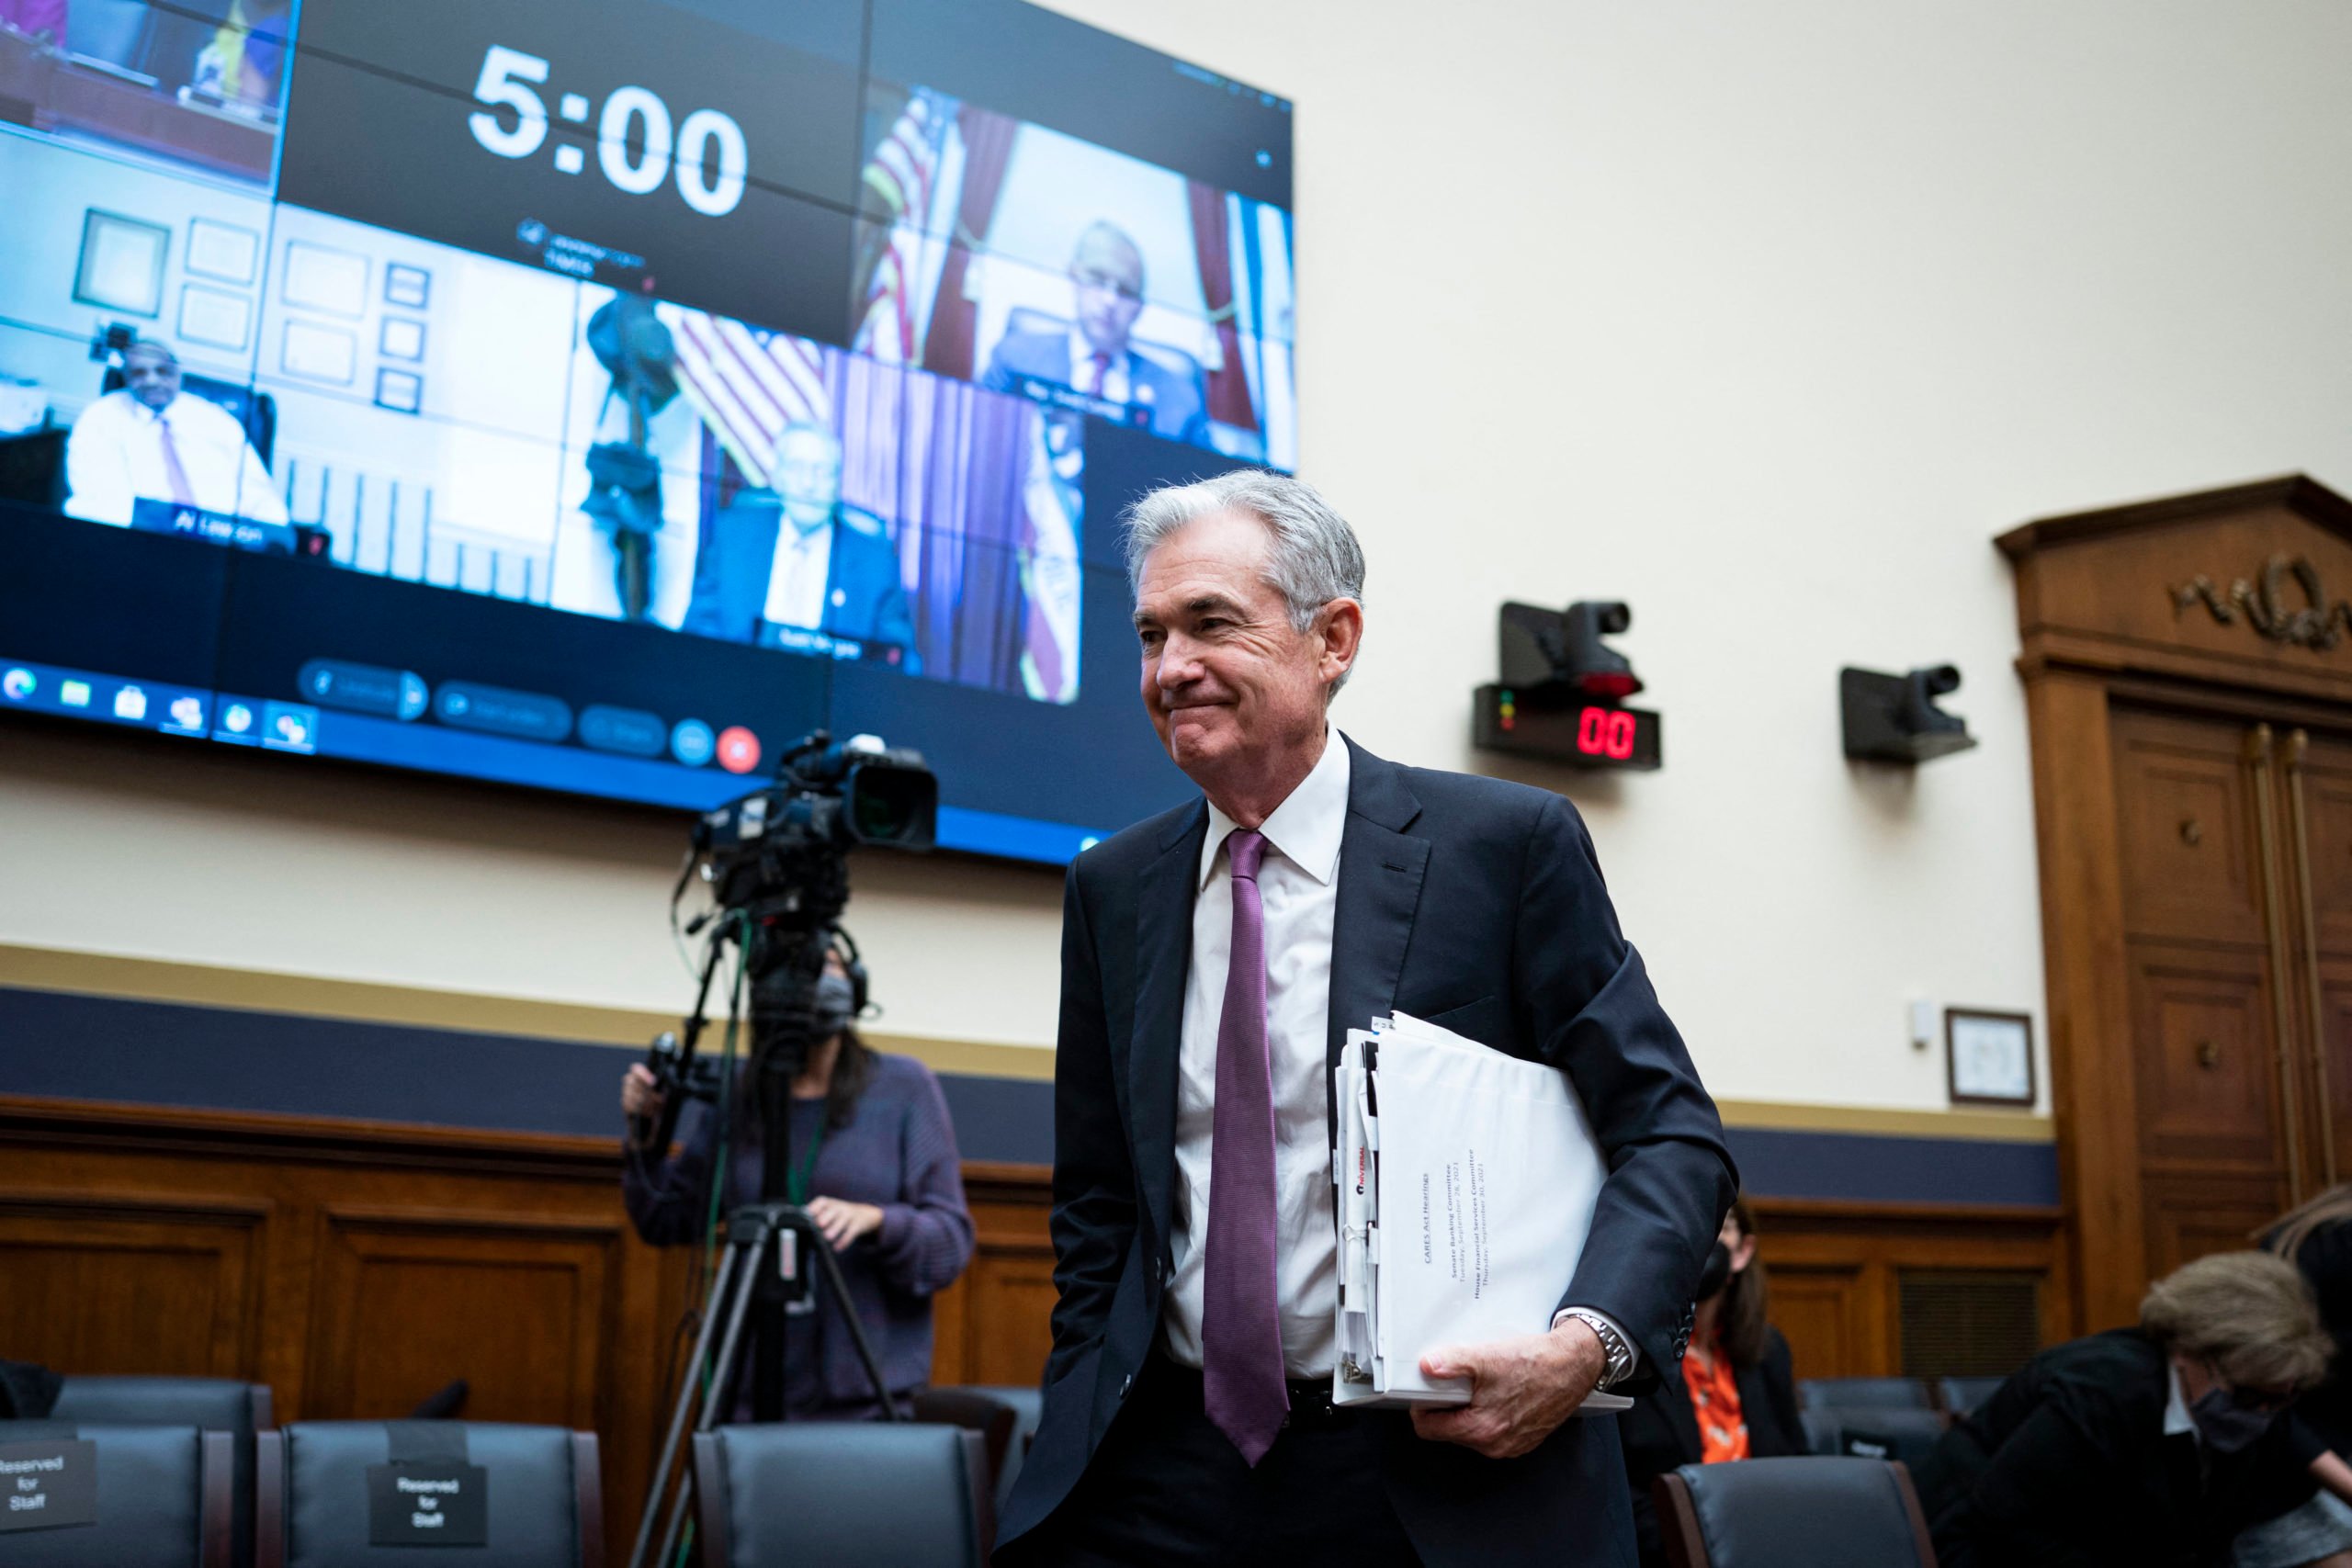 Federal Reserve Chairman Jerome Powell departs after speaking at a hearing Thursday. (Al Drago/Pool/AFP via Getty Images)